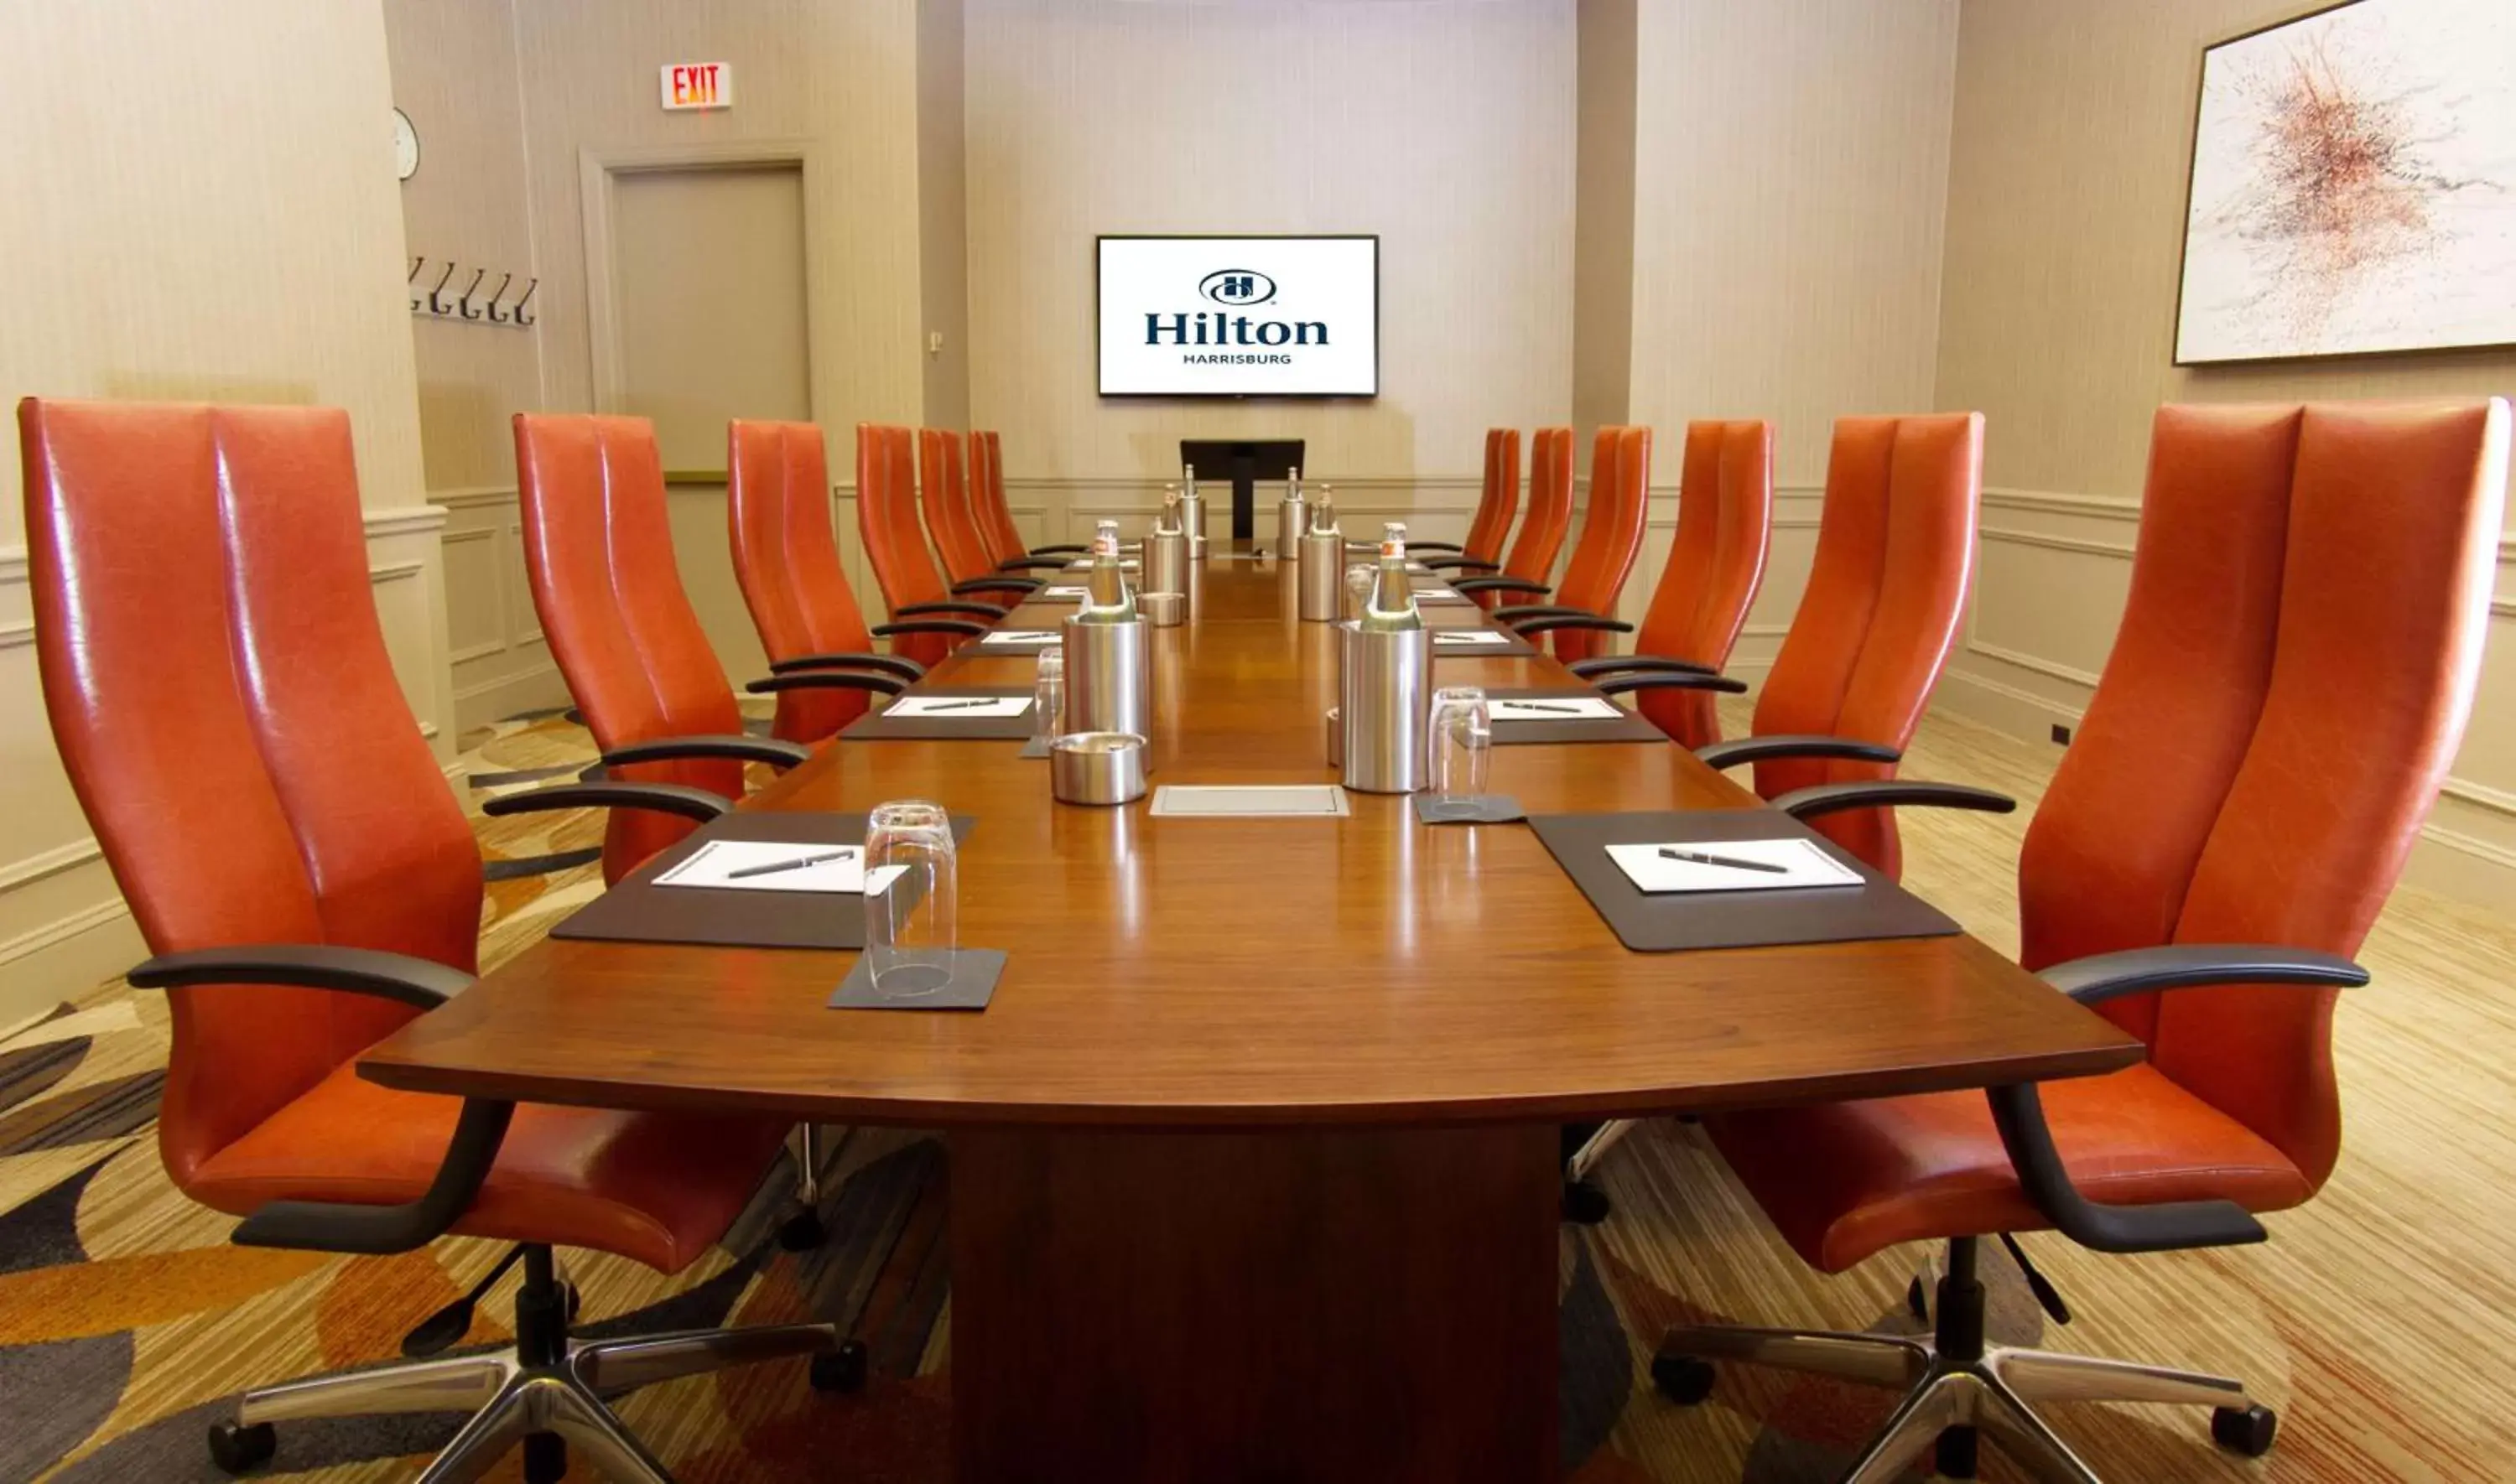 Meeting/conference room, Business Area/Conference Room in Hilton Harrisburg near Hershey Park